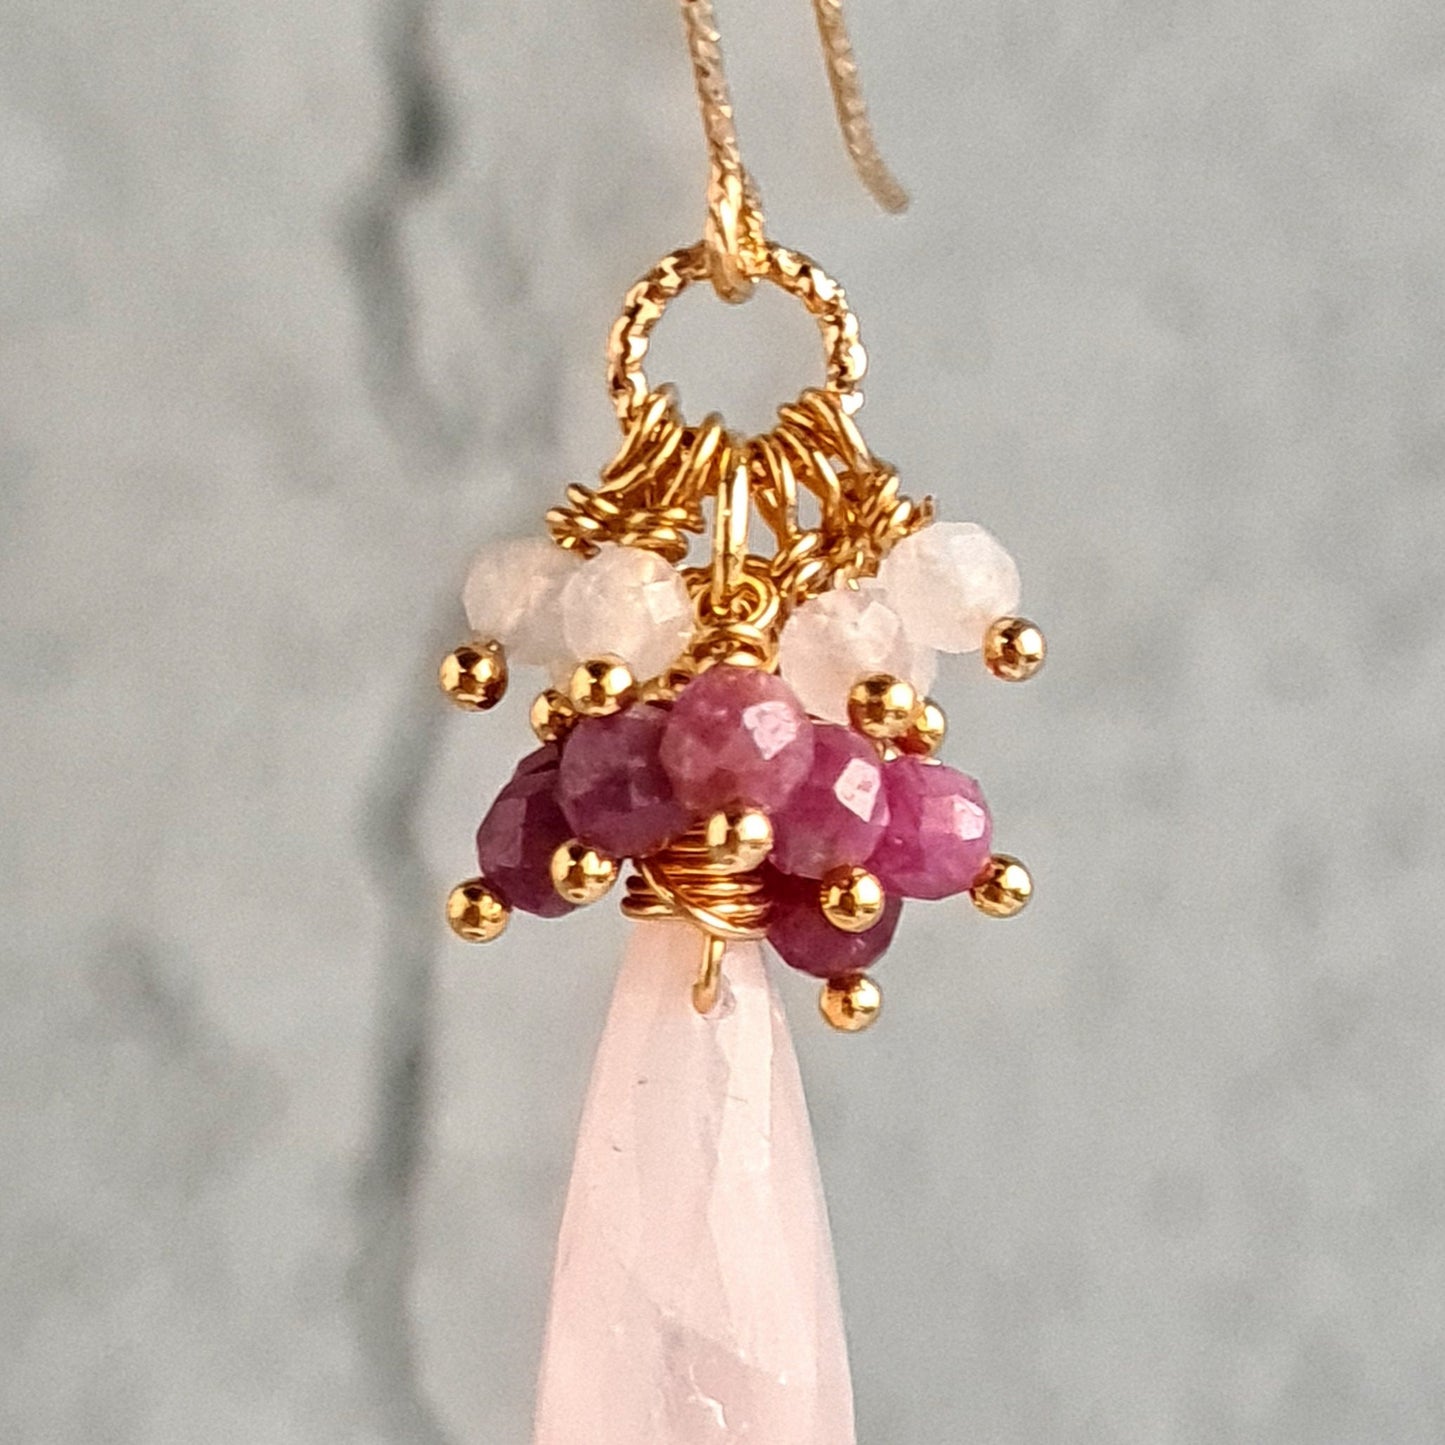 Rose Quartz Faceted Drops with Sri Lankan Ruby and Rose Quartz Round Cluster Gemstone Earrings